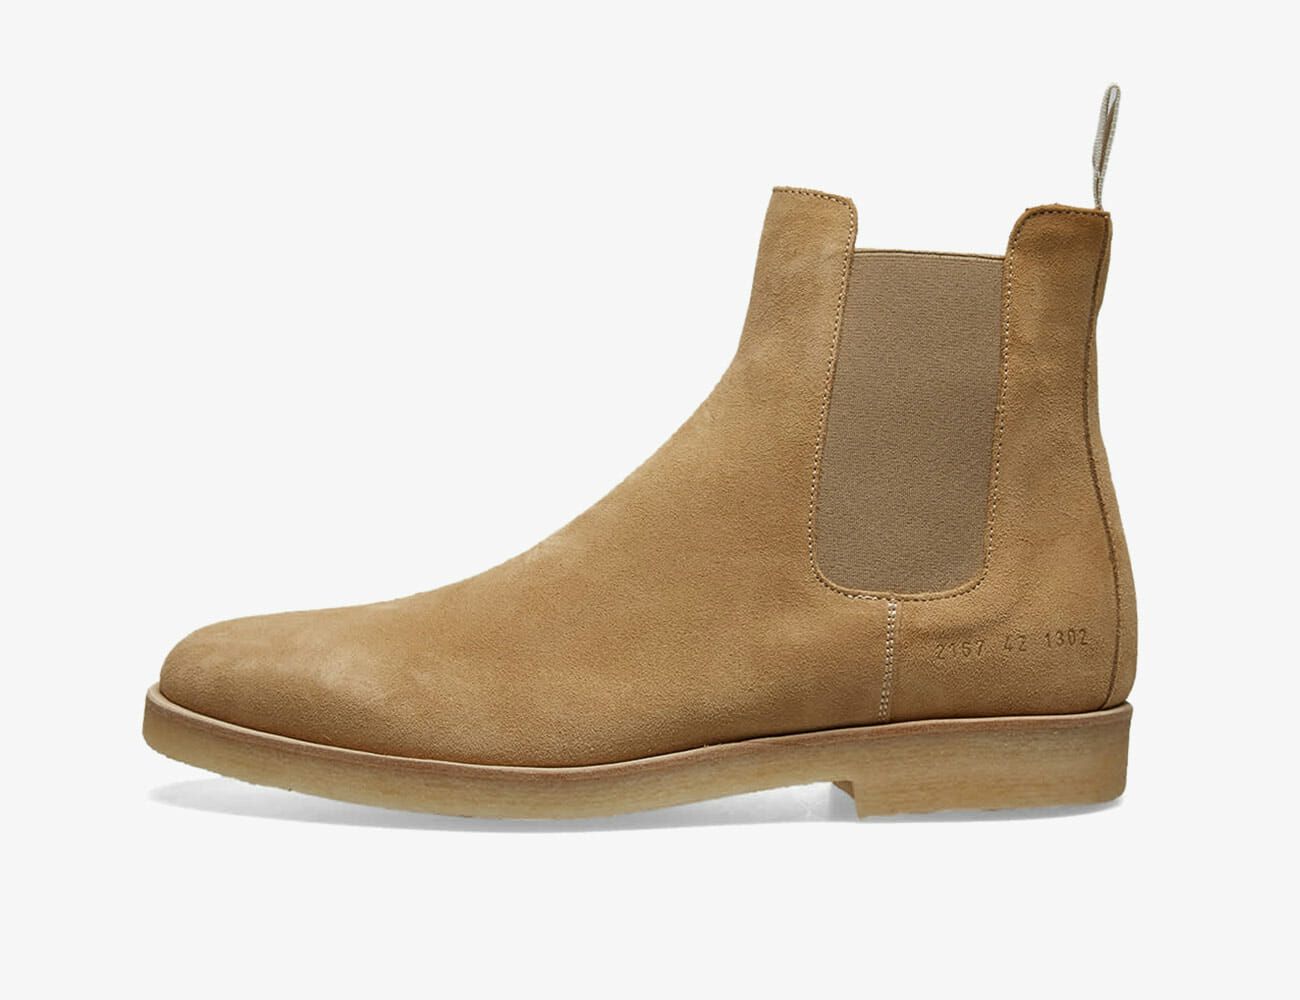 mens tall chelsea boots